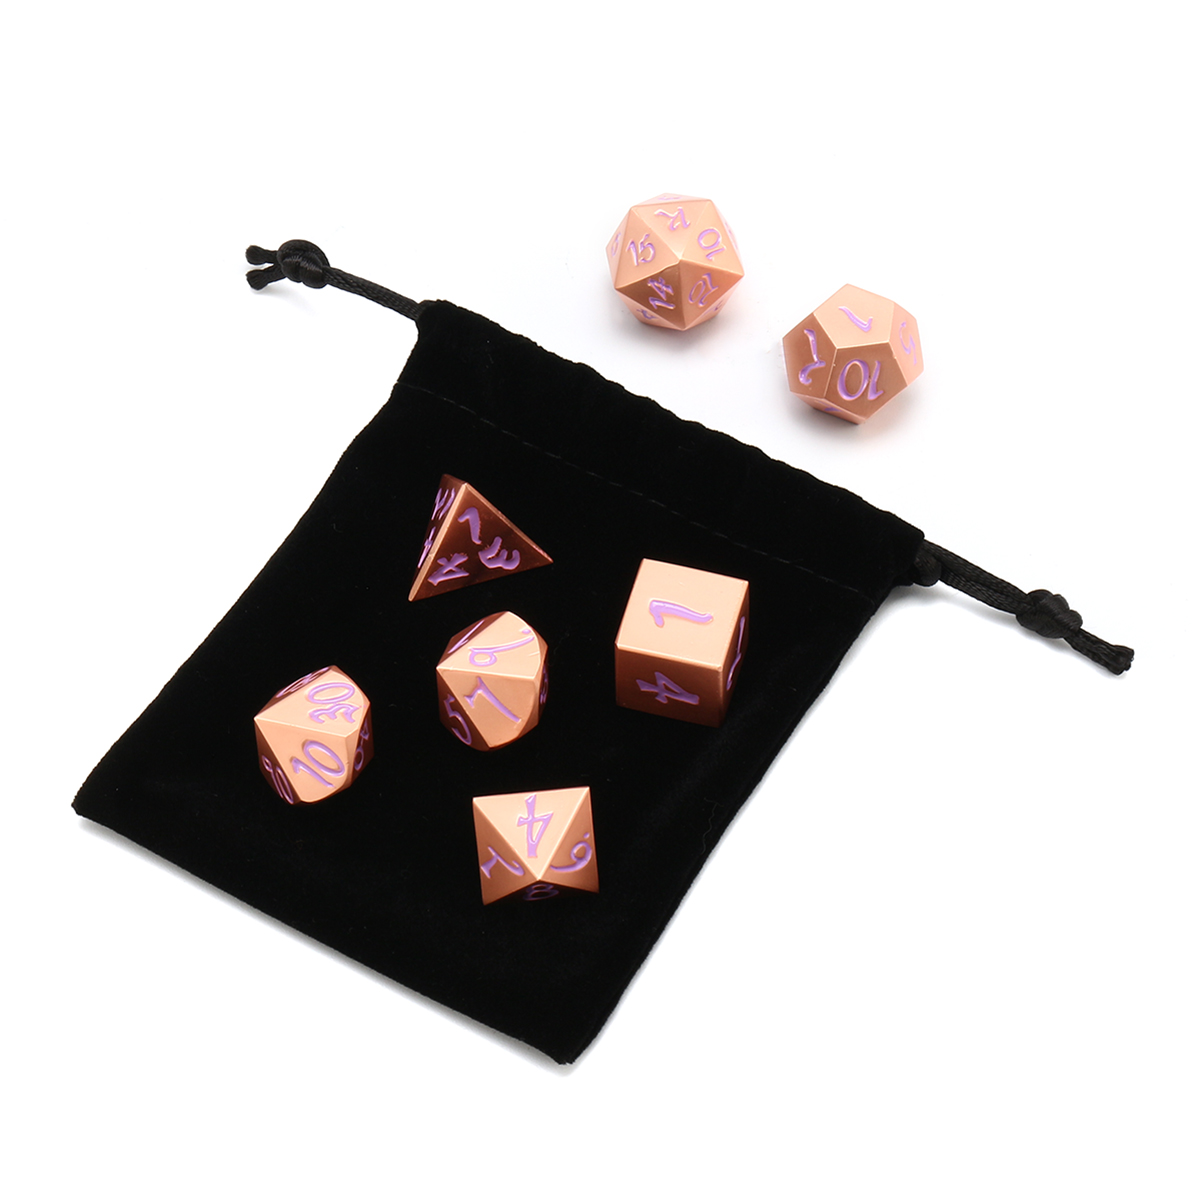 7Pcs-Antique-Metal-Polyhedral-Dice-Role-Playing-Game-Dices-Heavy-Duty-With-Bag-1320392-8